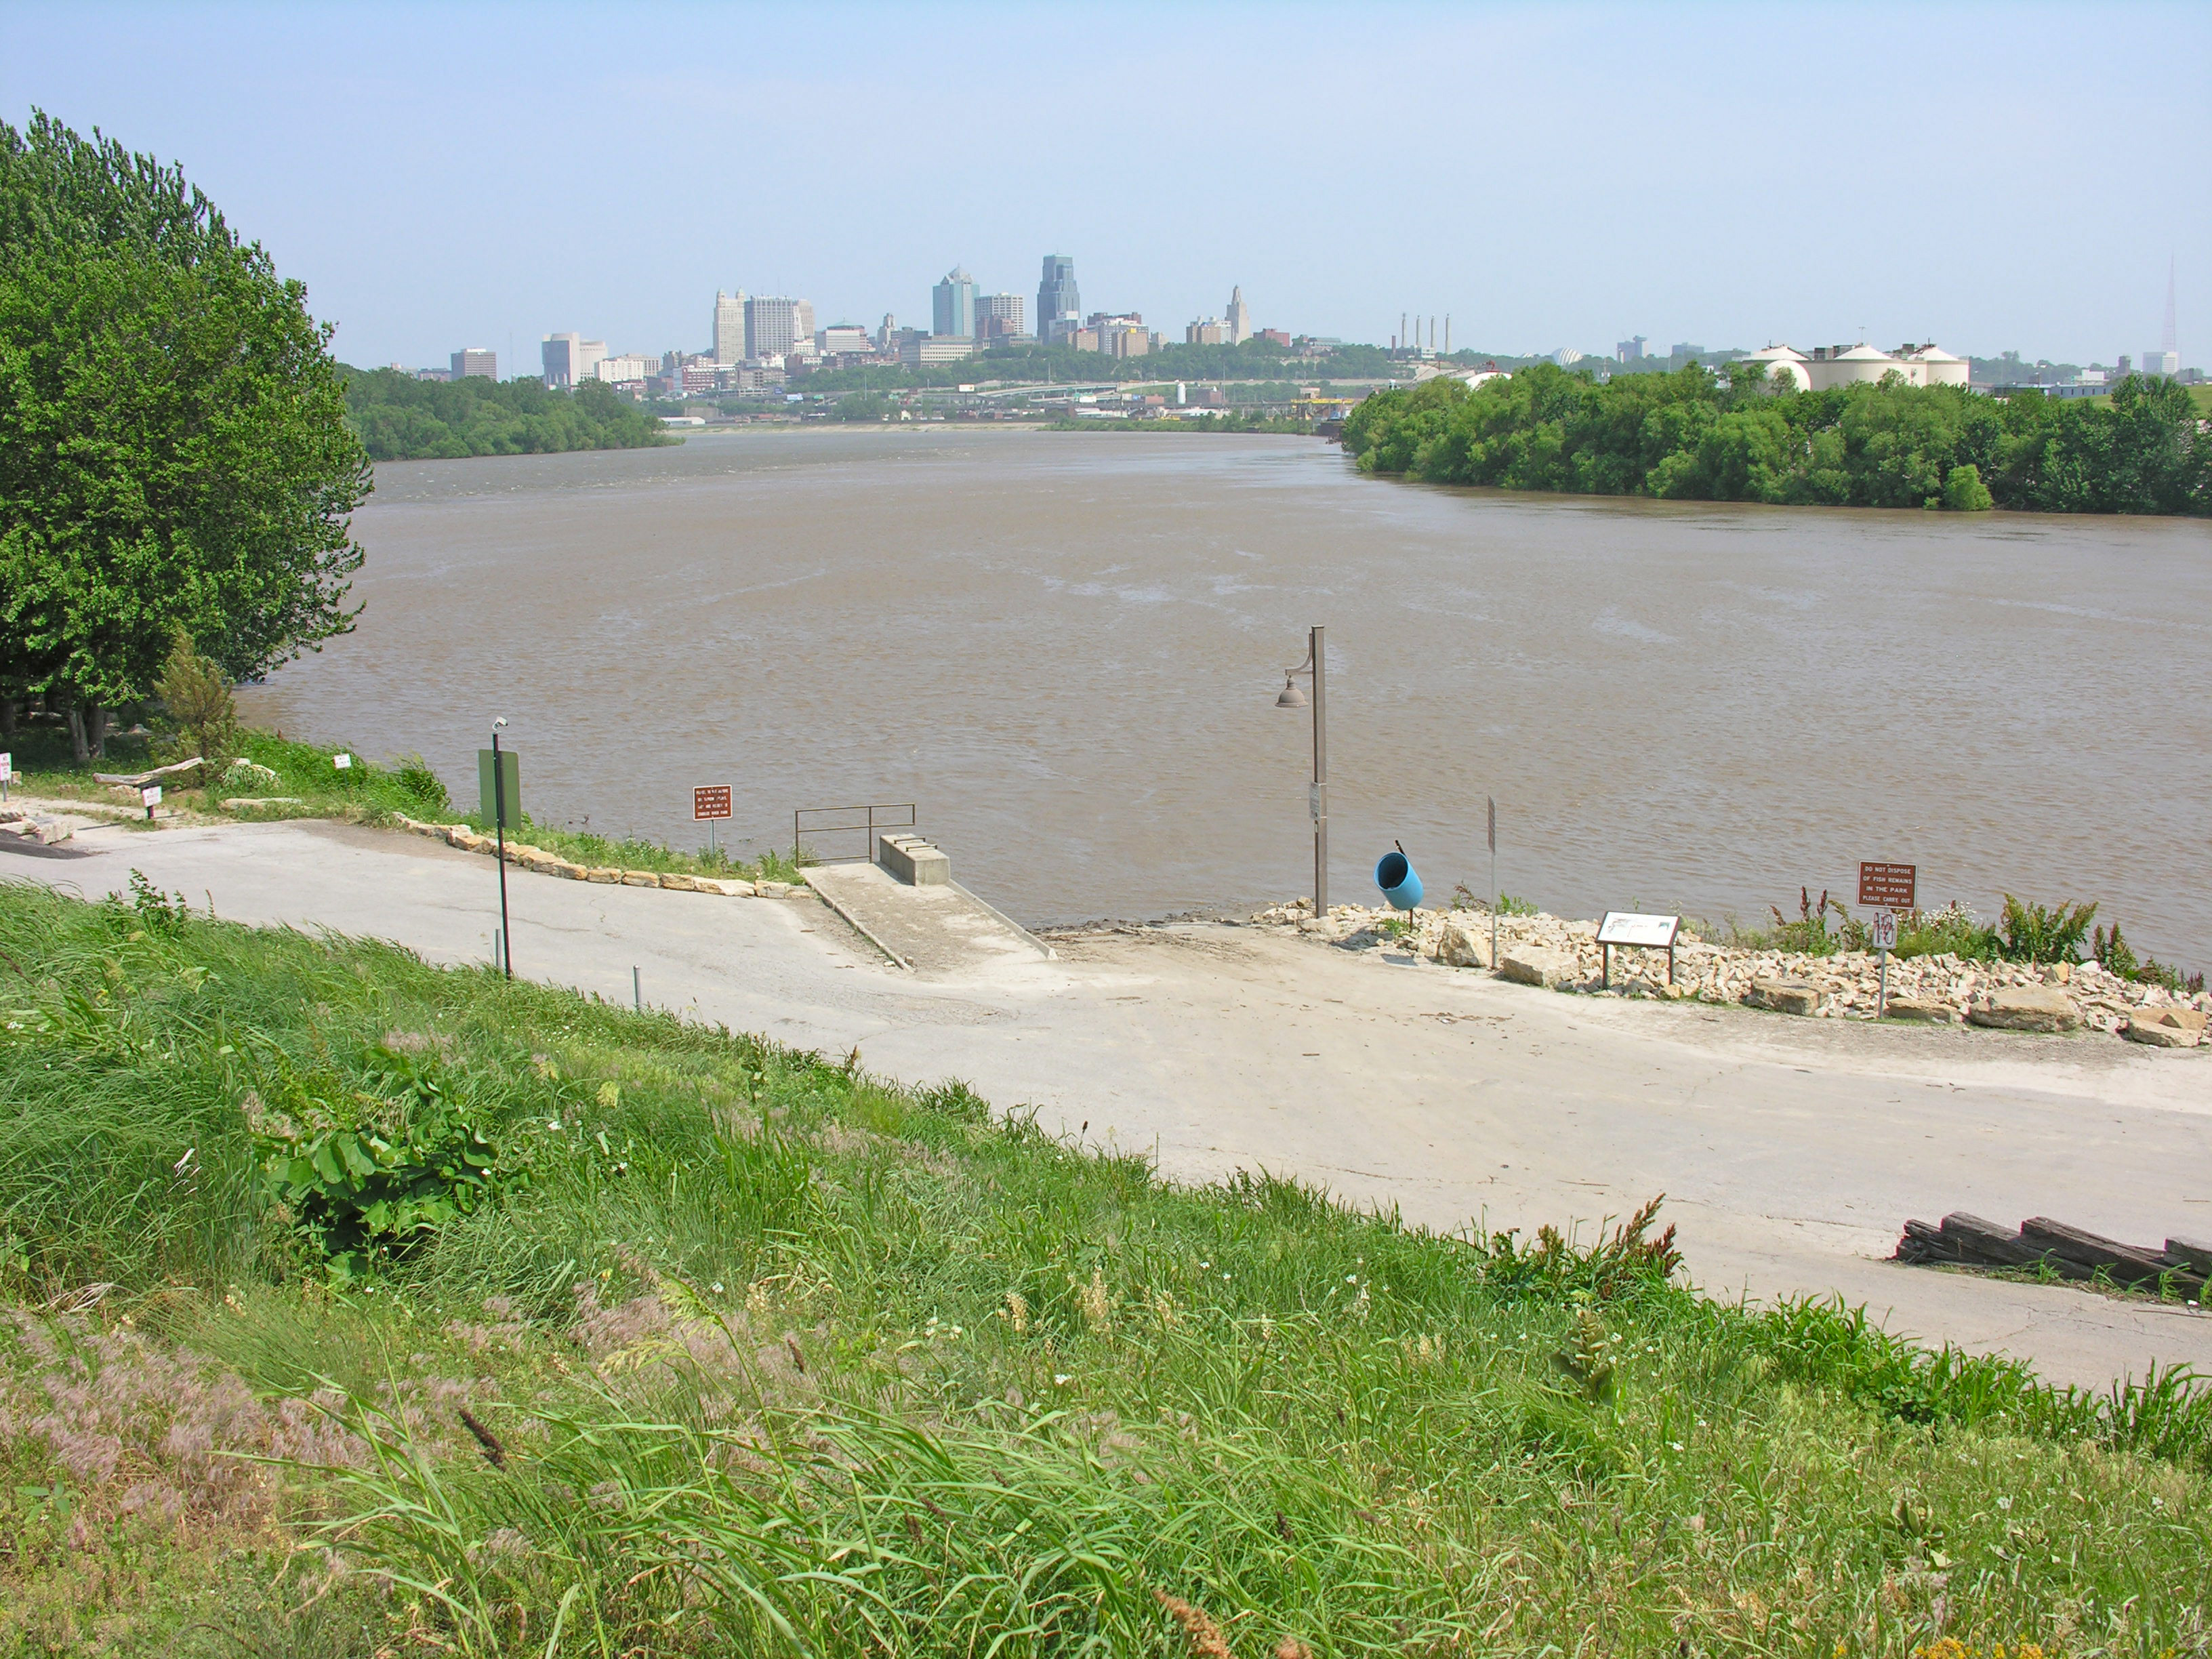 Kaw Point Park, Missouri River bend and confluence with Kansas River (left behind tree), and Kansas City, Missouri, skyline.